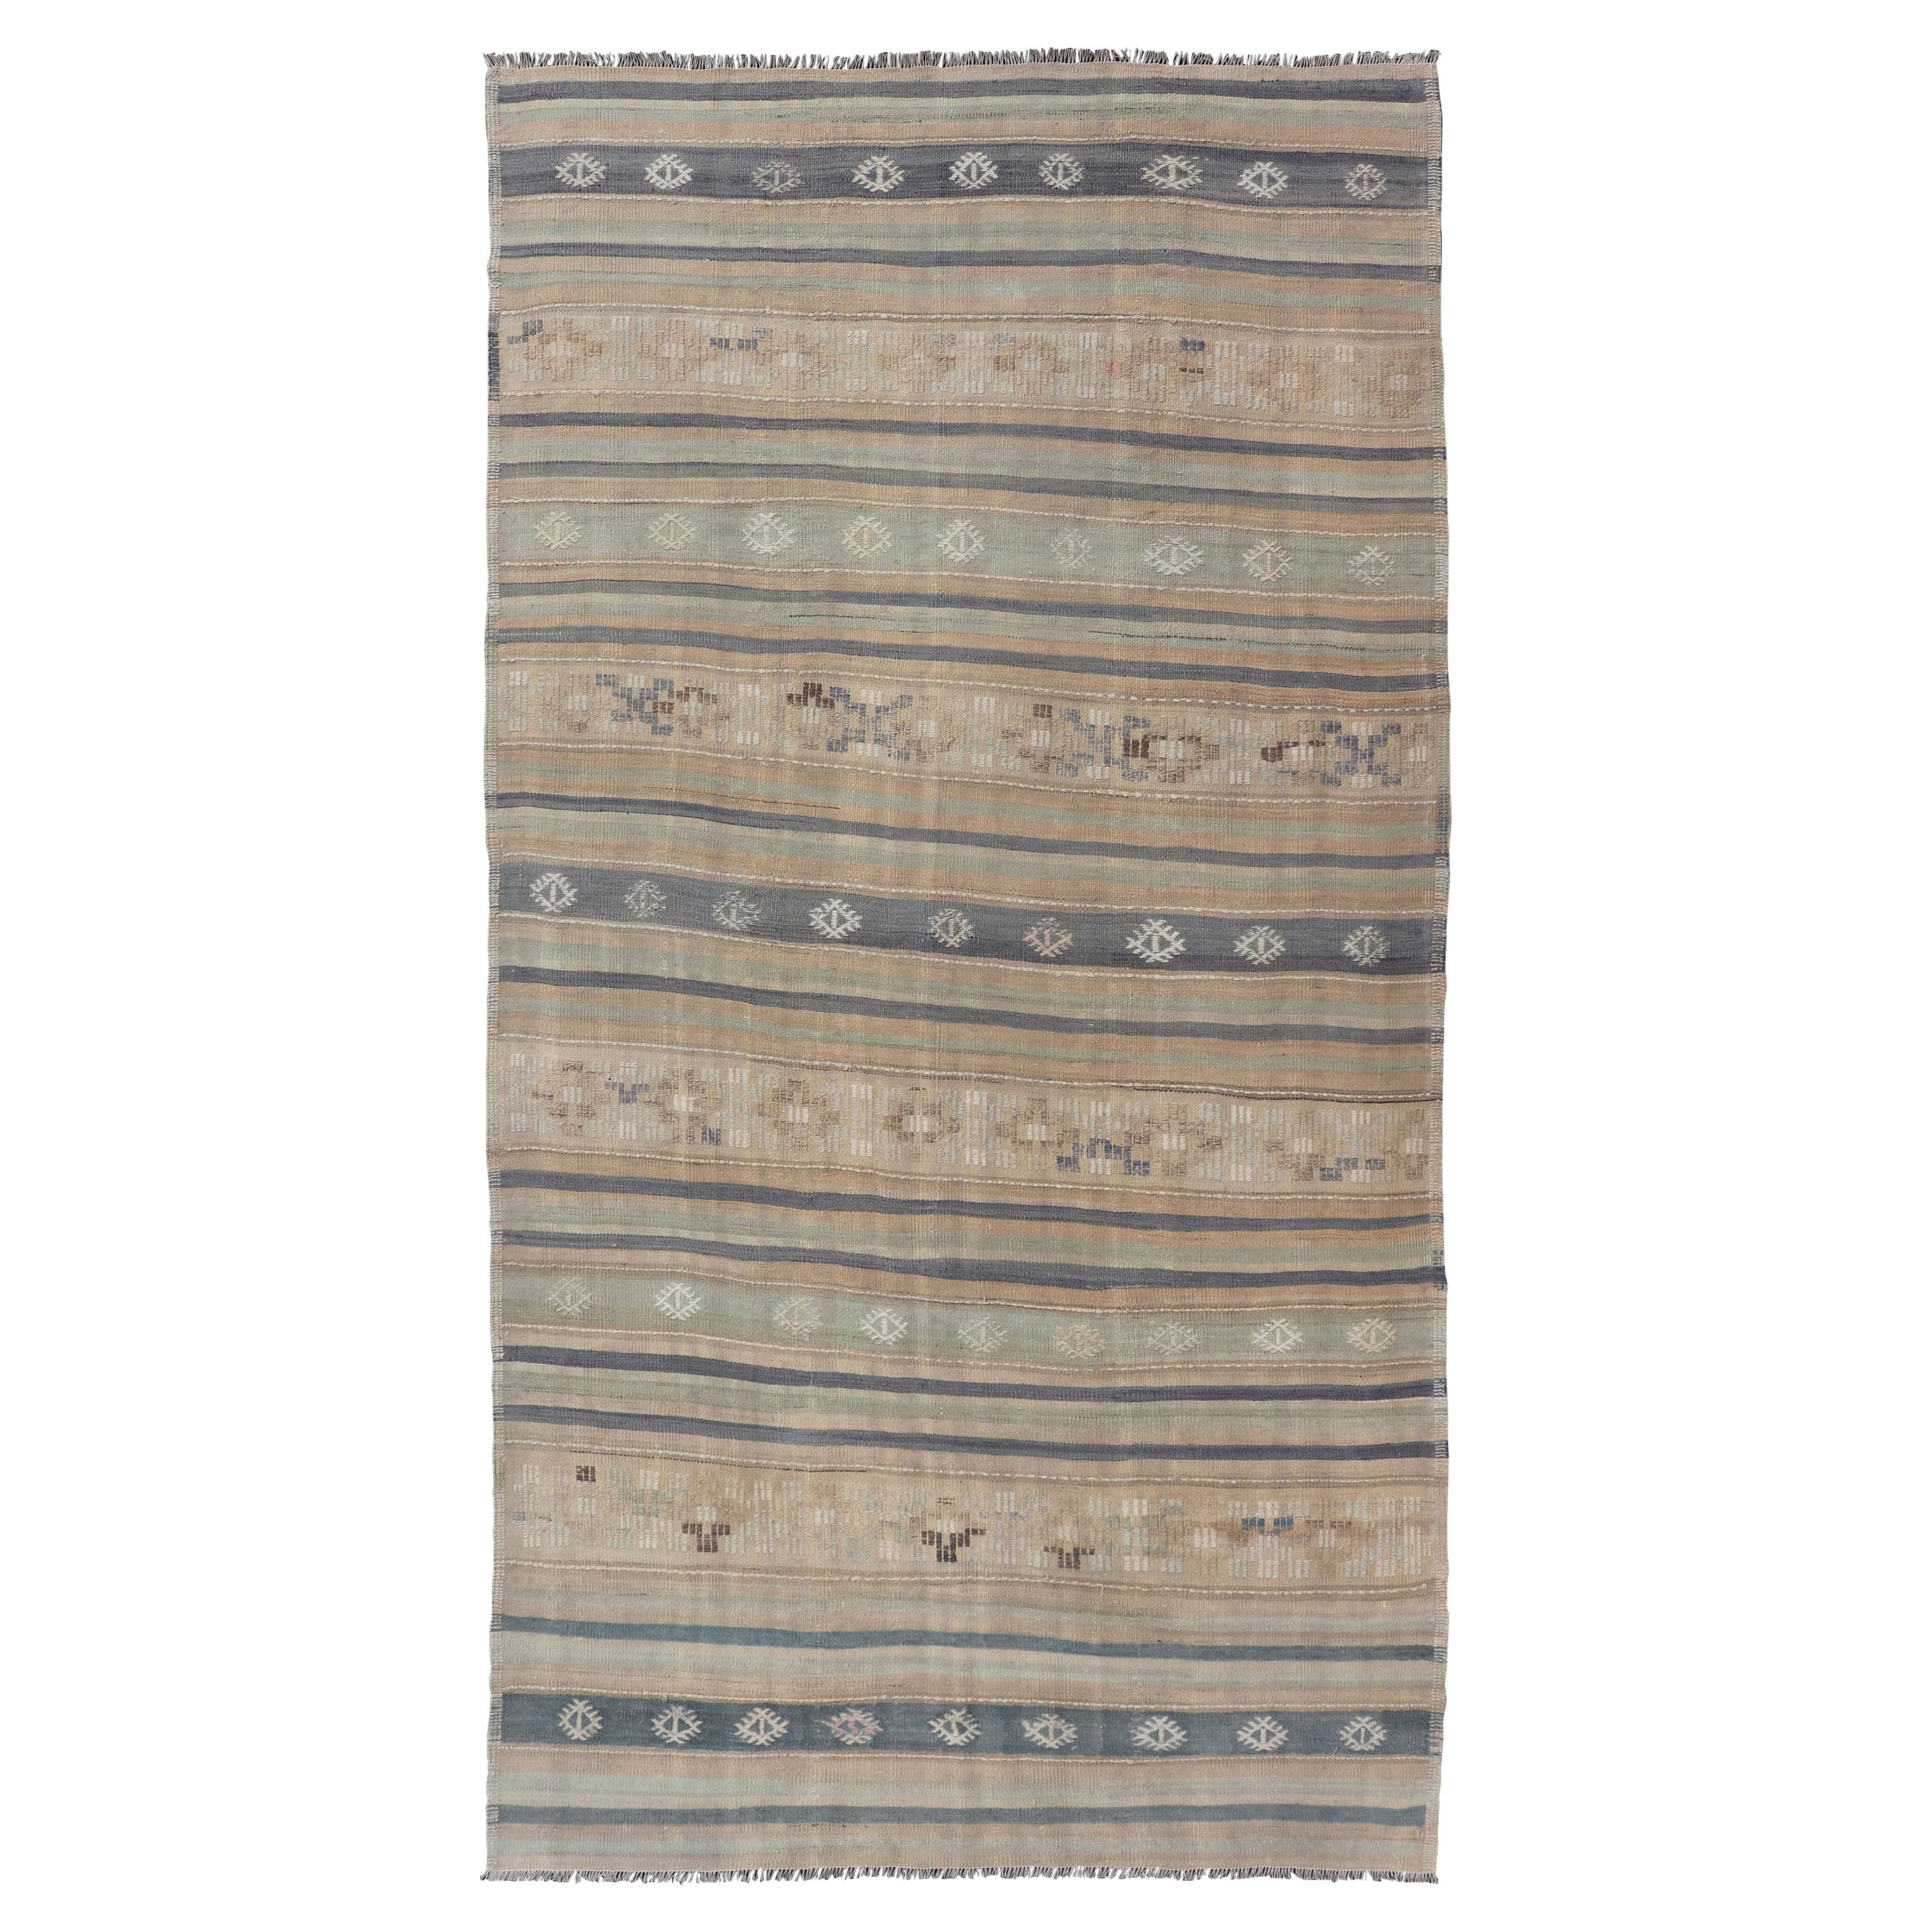 Vintage Hand Woven Turkish Kilim with Stripes in Light Taupe and Neutral Colors